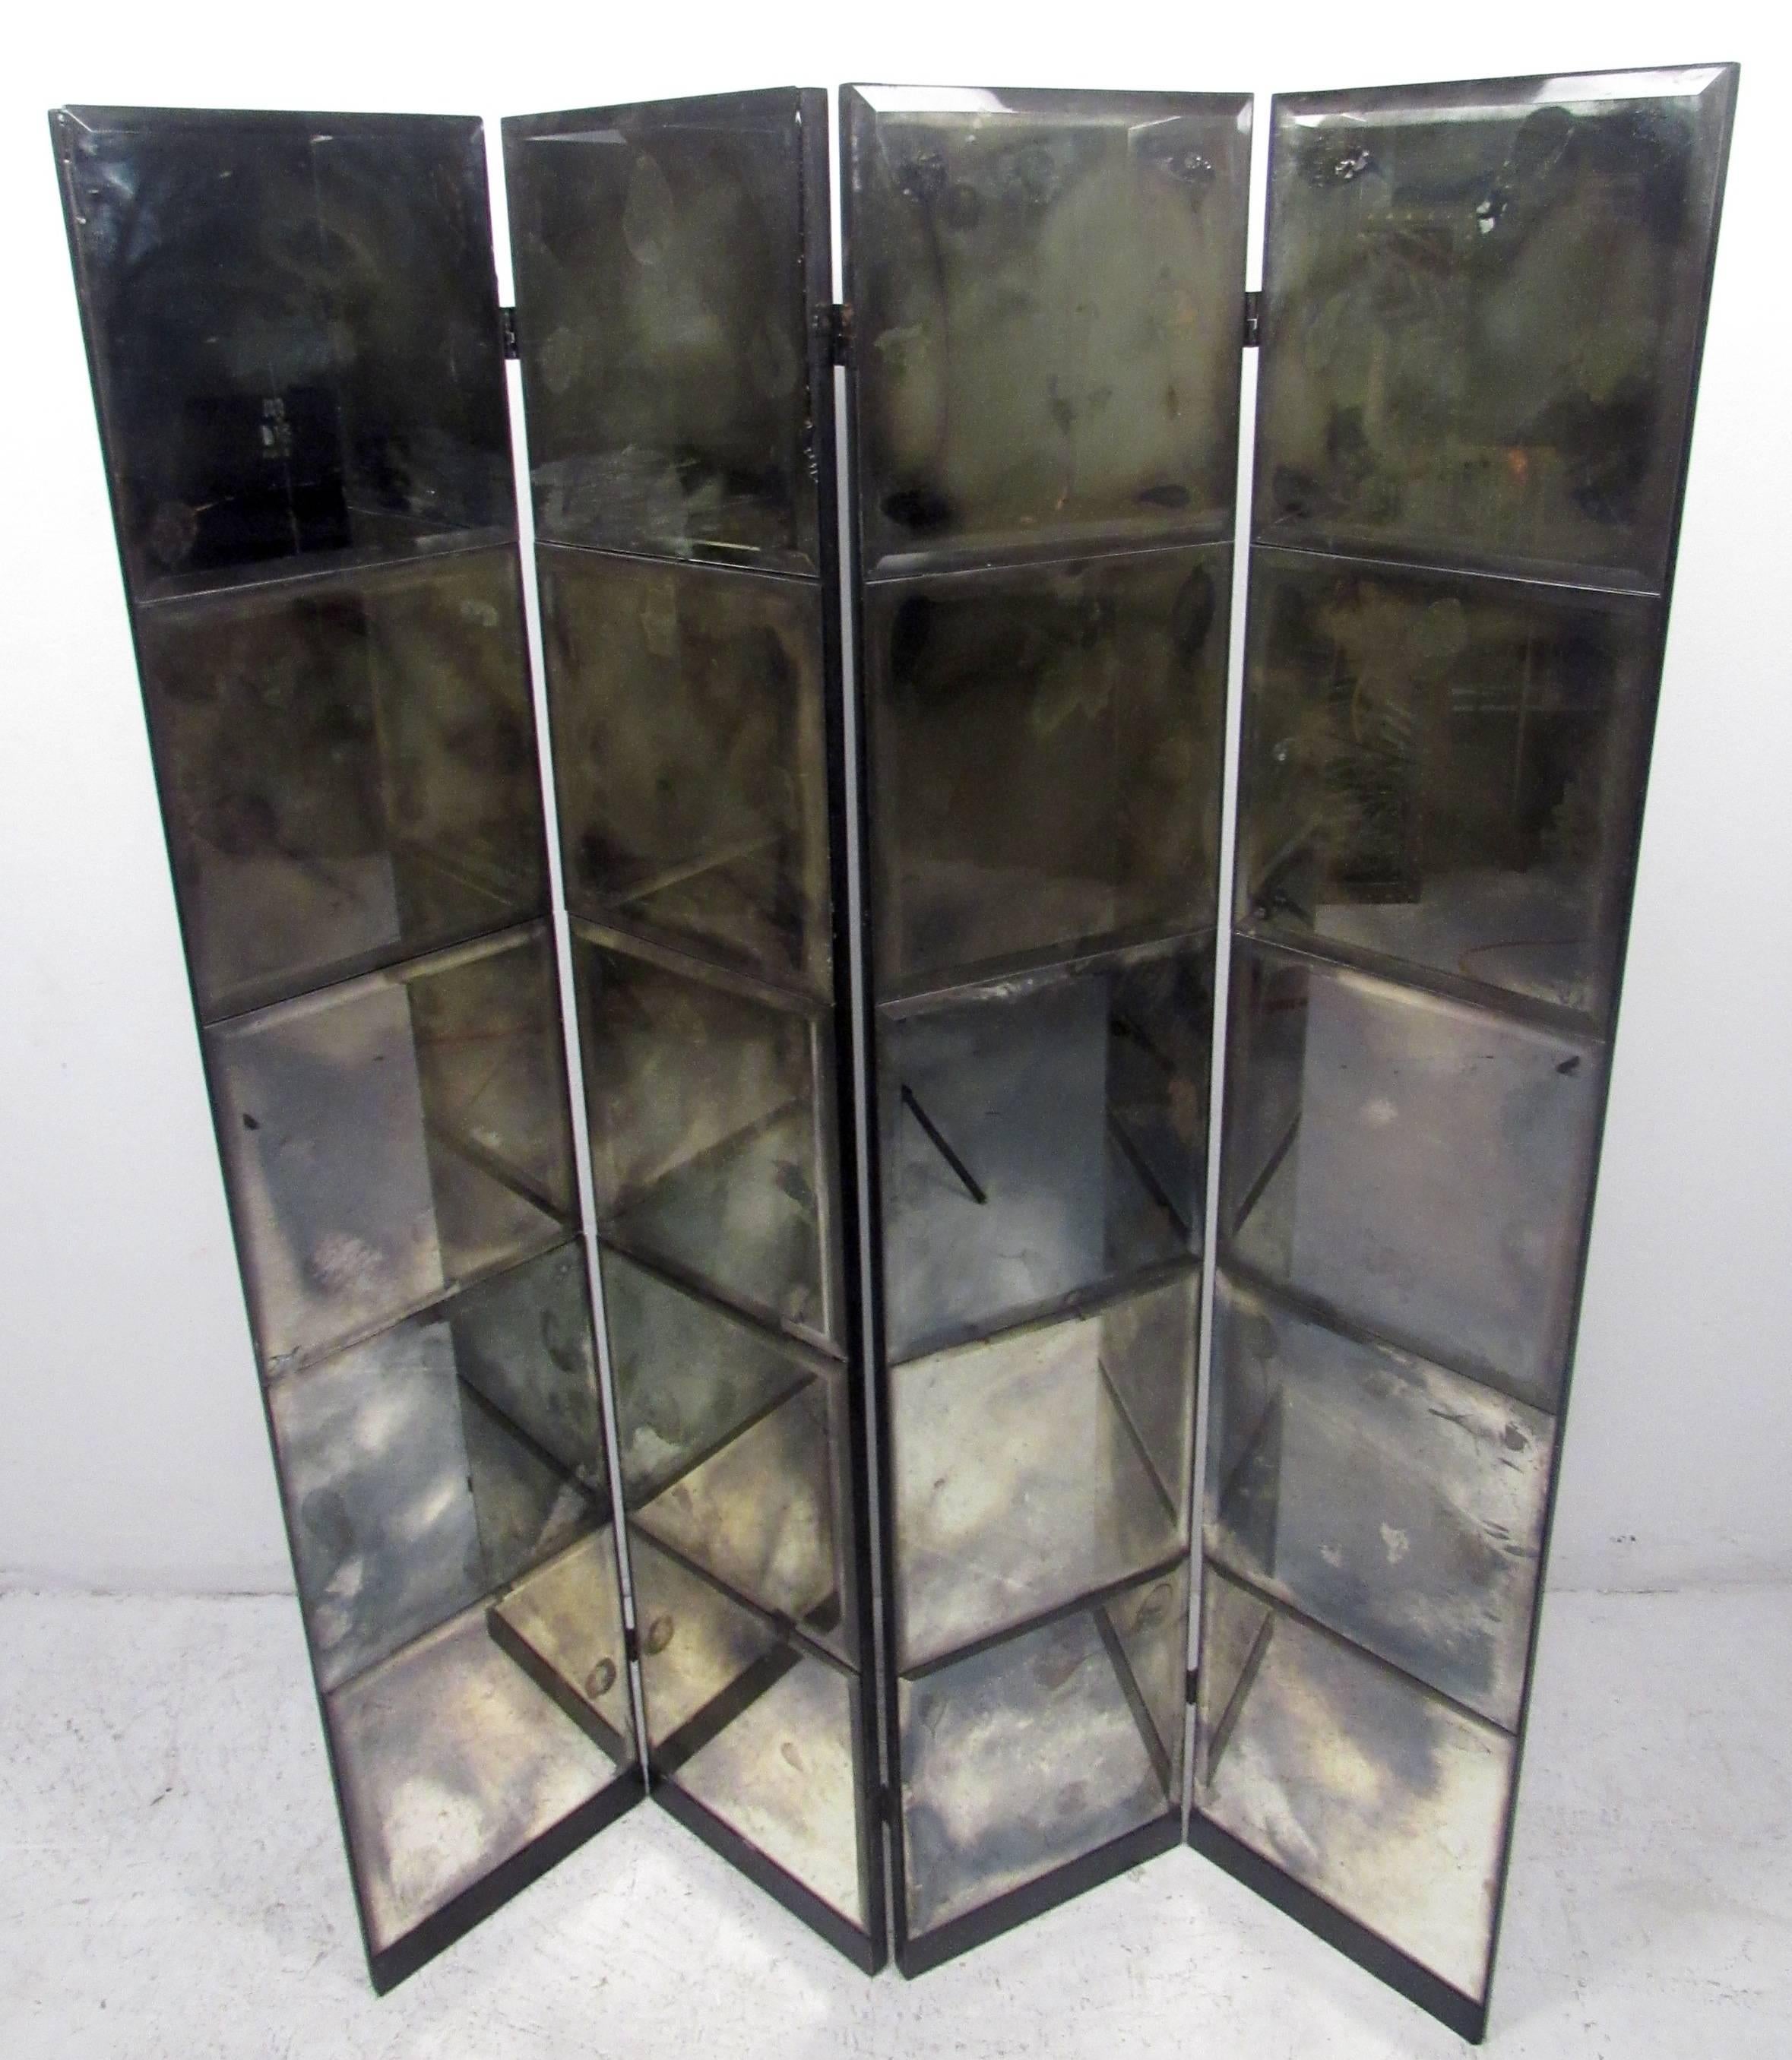 Vintage modern room divider featuring mirrored front and hardwood black back and frame.

Please confirm item location NY or NJ with dealer.